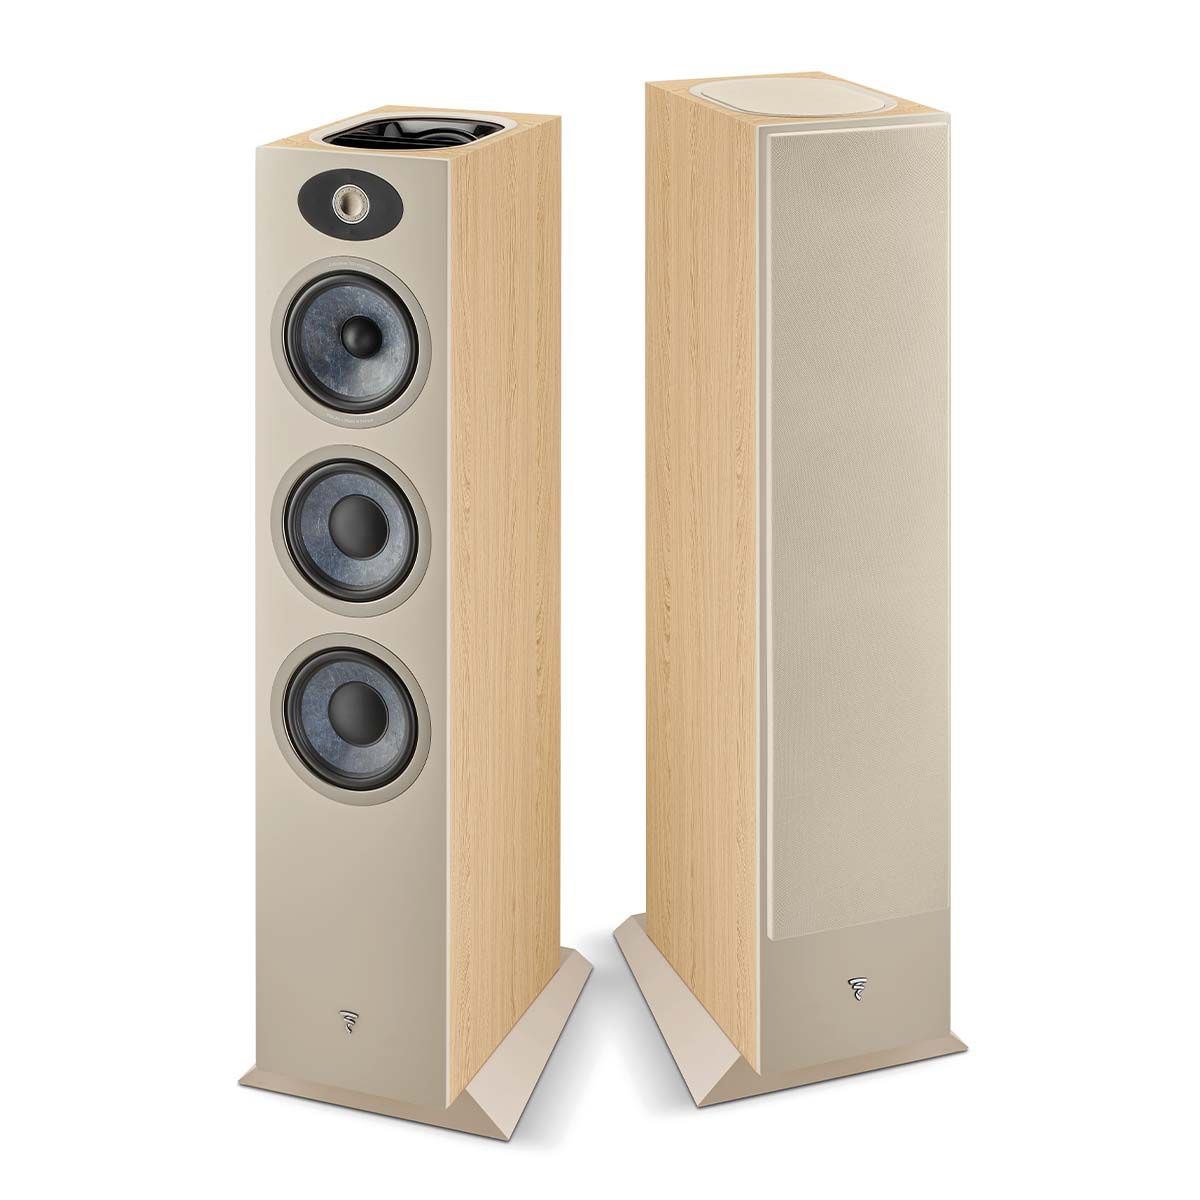 Focal Theva No3-D Floorstanding Speaker - Light Wood - Each - view of pair, one with grilles, one without grilles